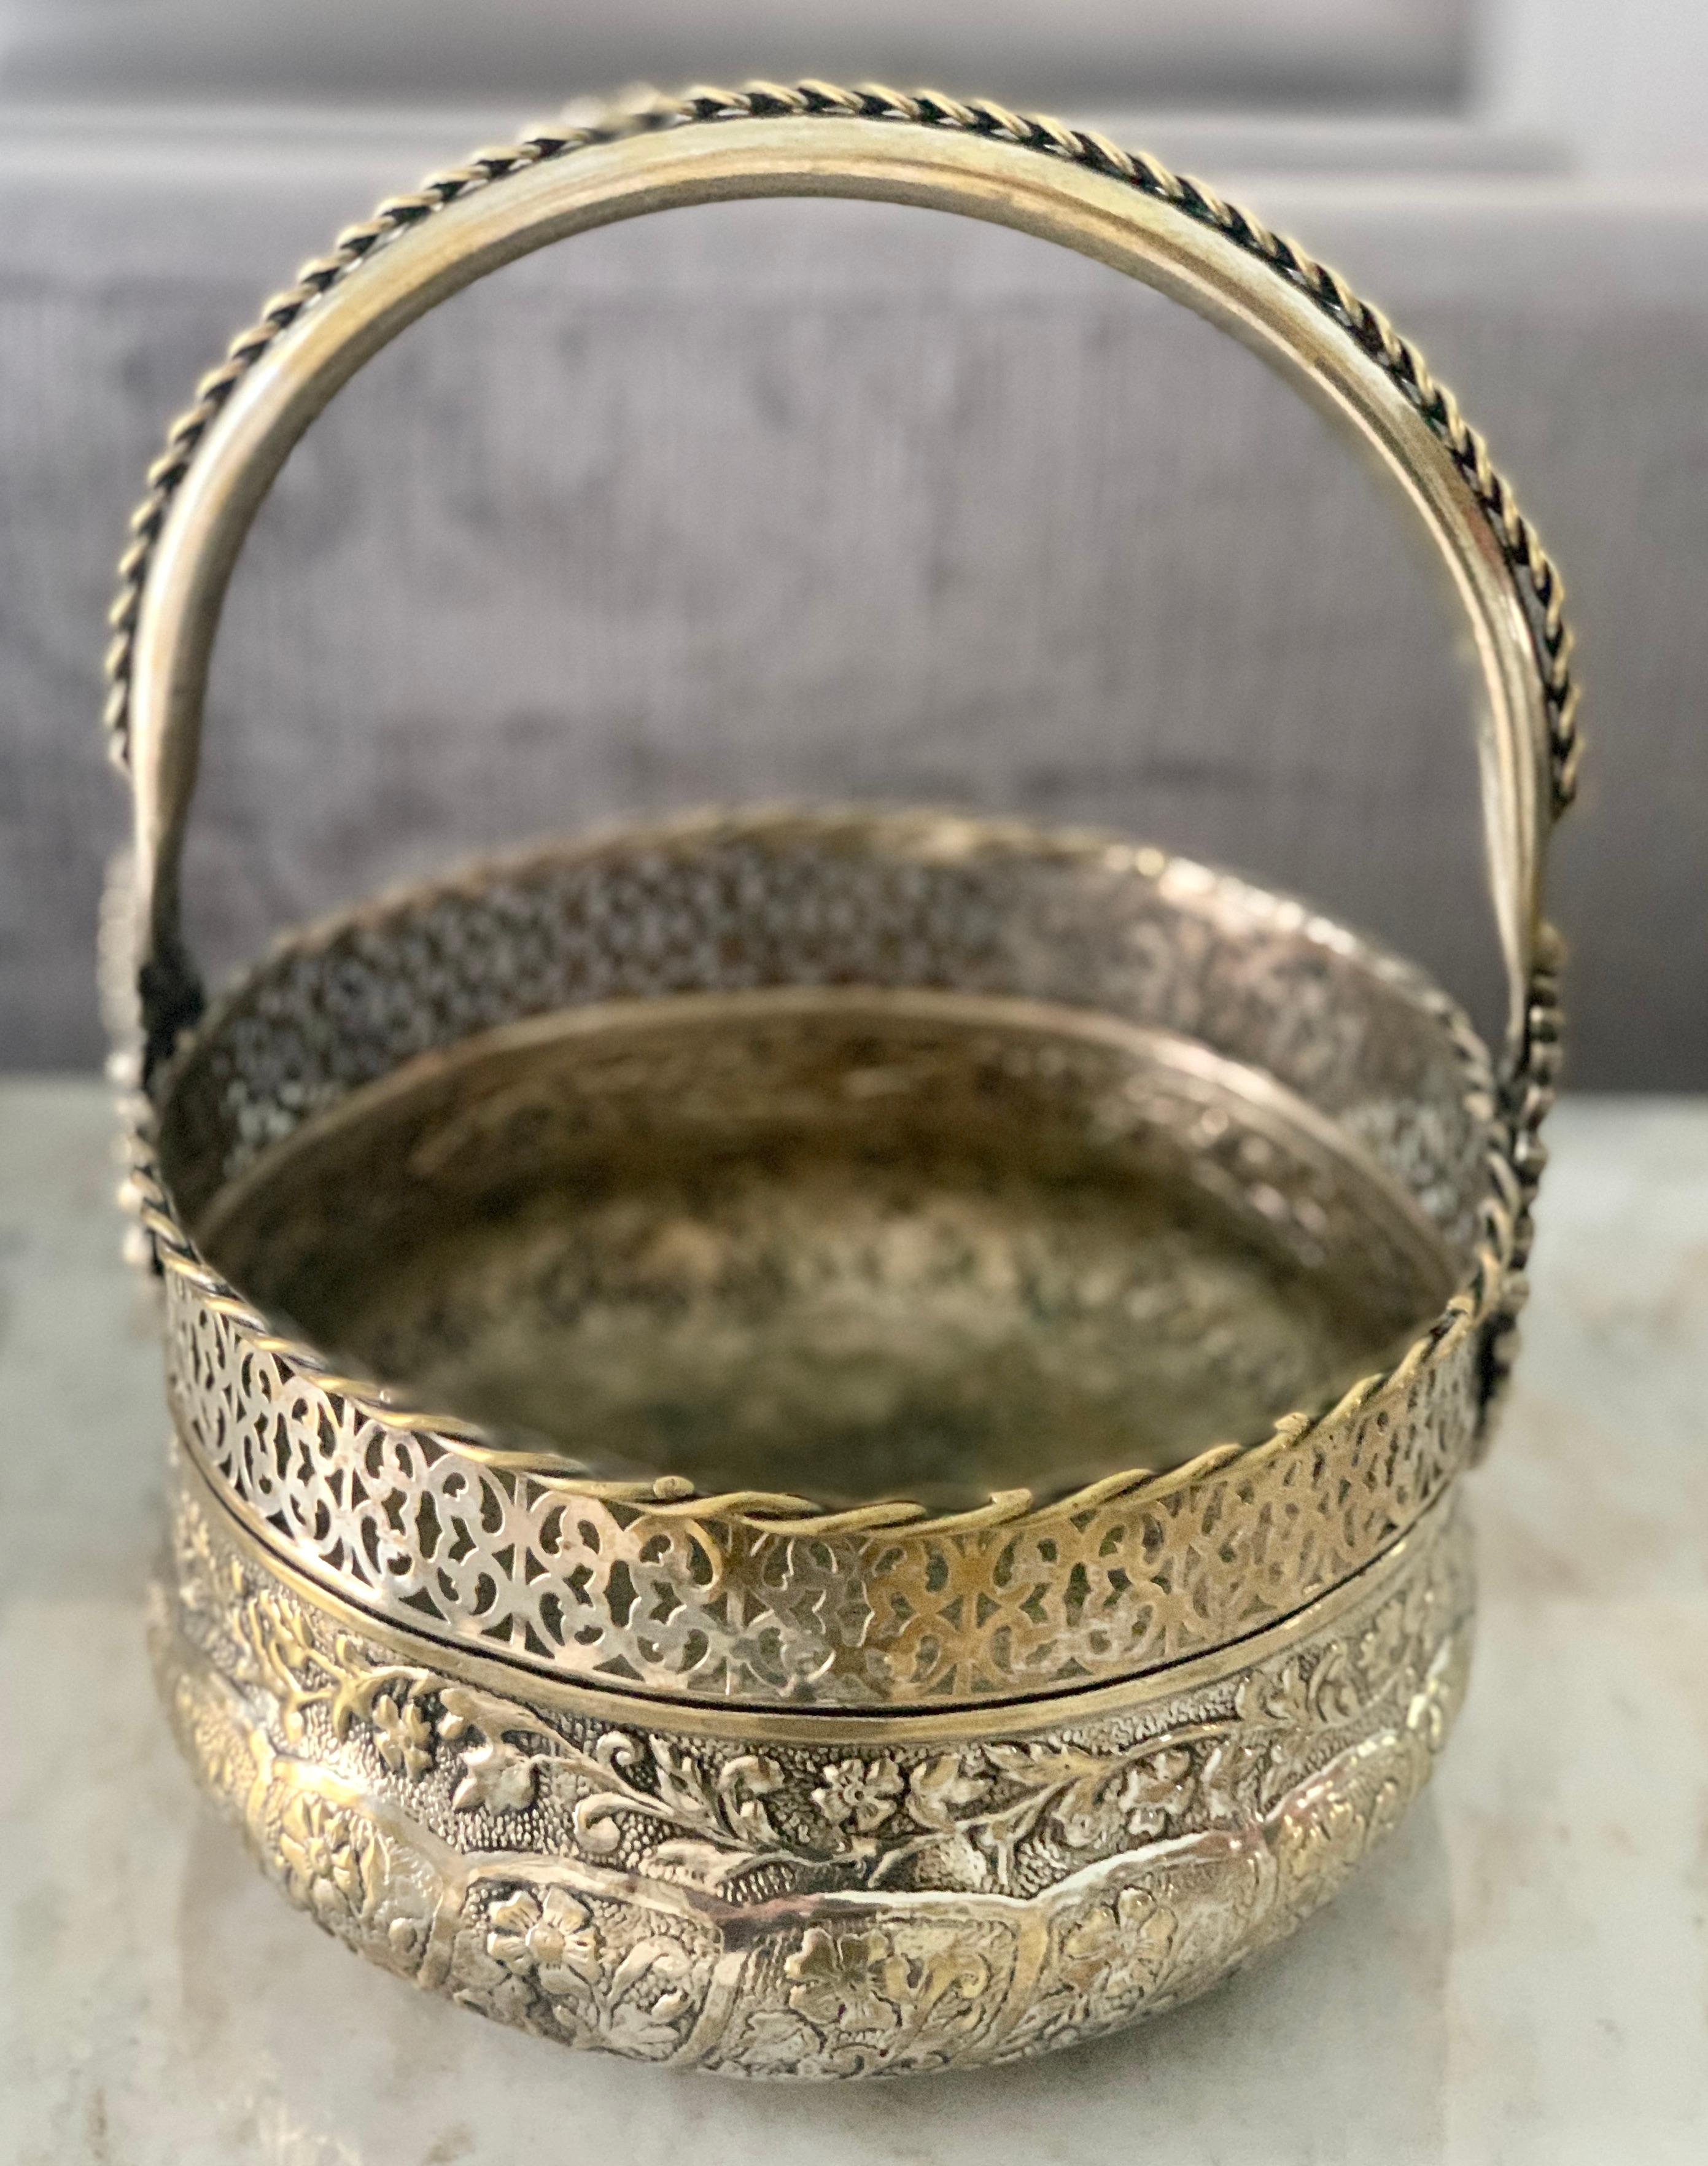 A striking silver basket with repousse and pierced lattice like detailing - hammered bottom with repousse flowers, leaves and foliage- suitable for flowers or fruit as a centerpiece. ...useful as a piece to carry items from room to room or garden to